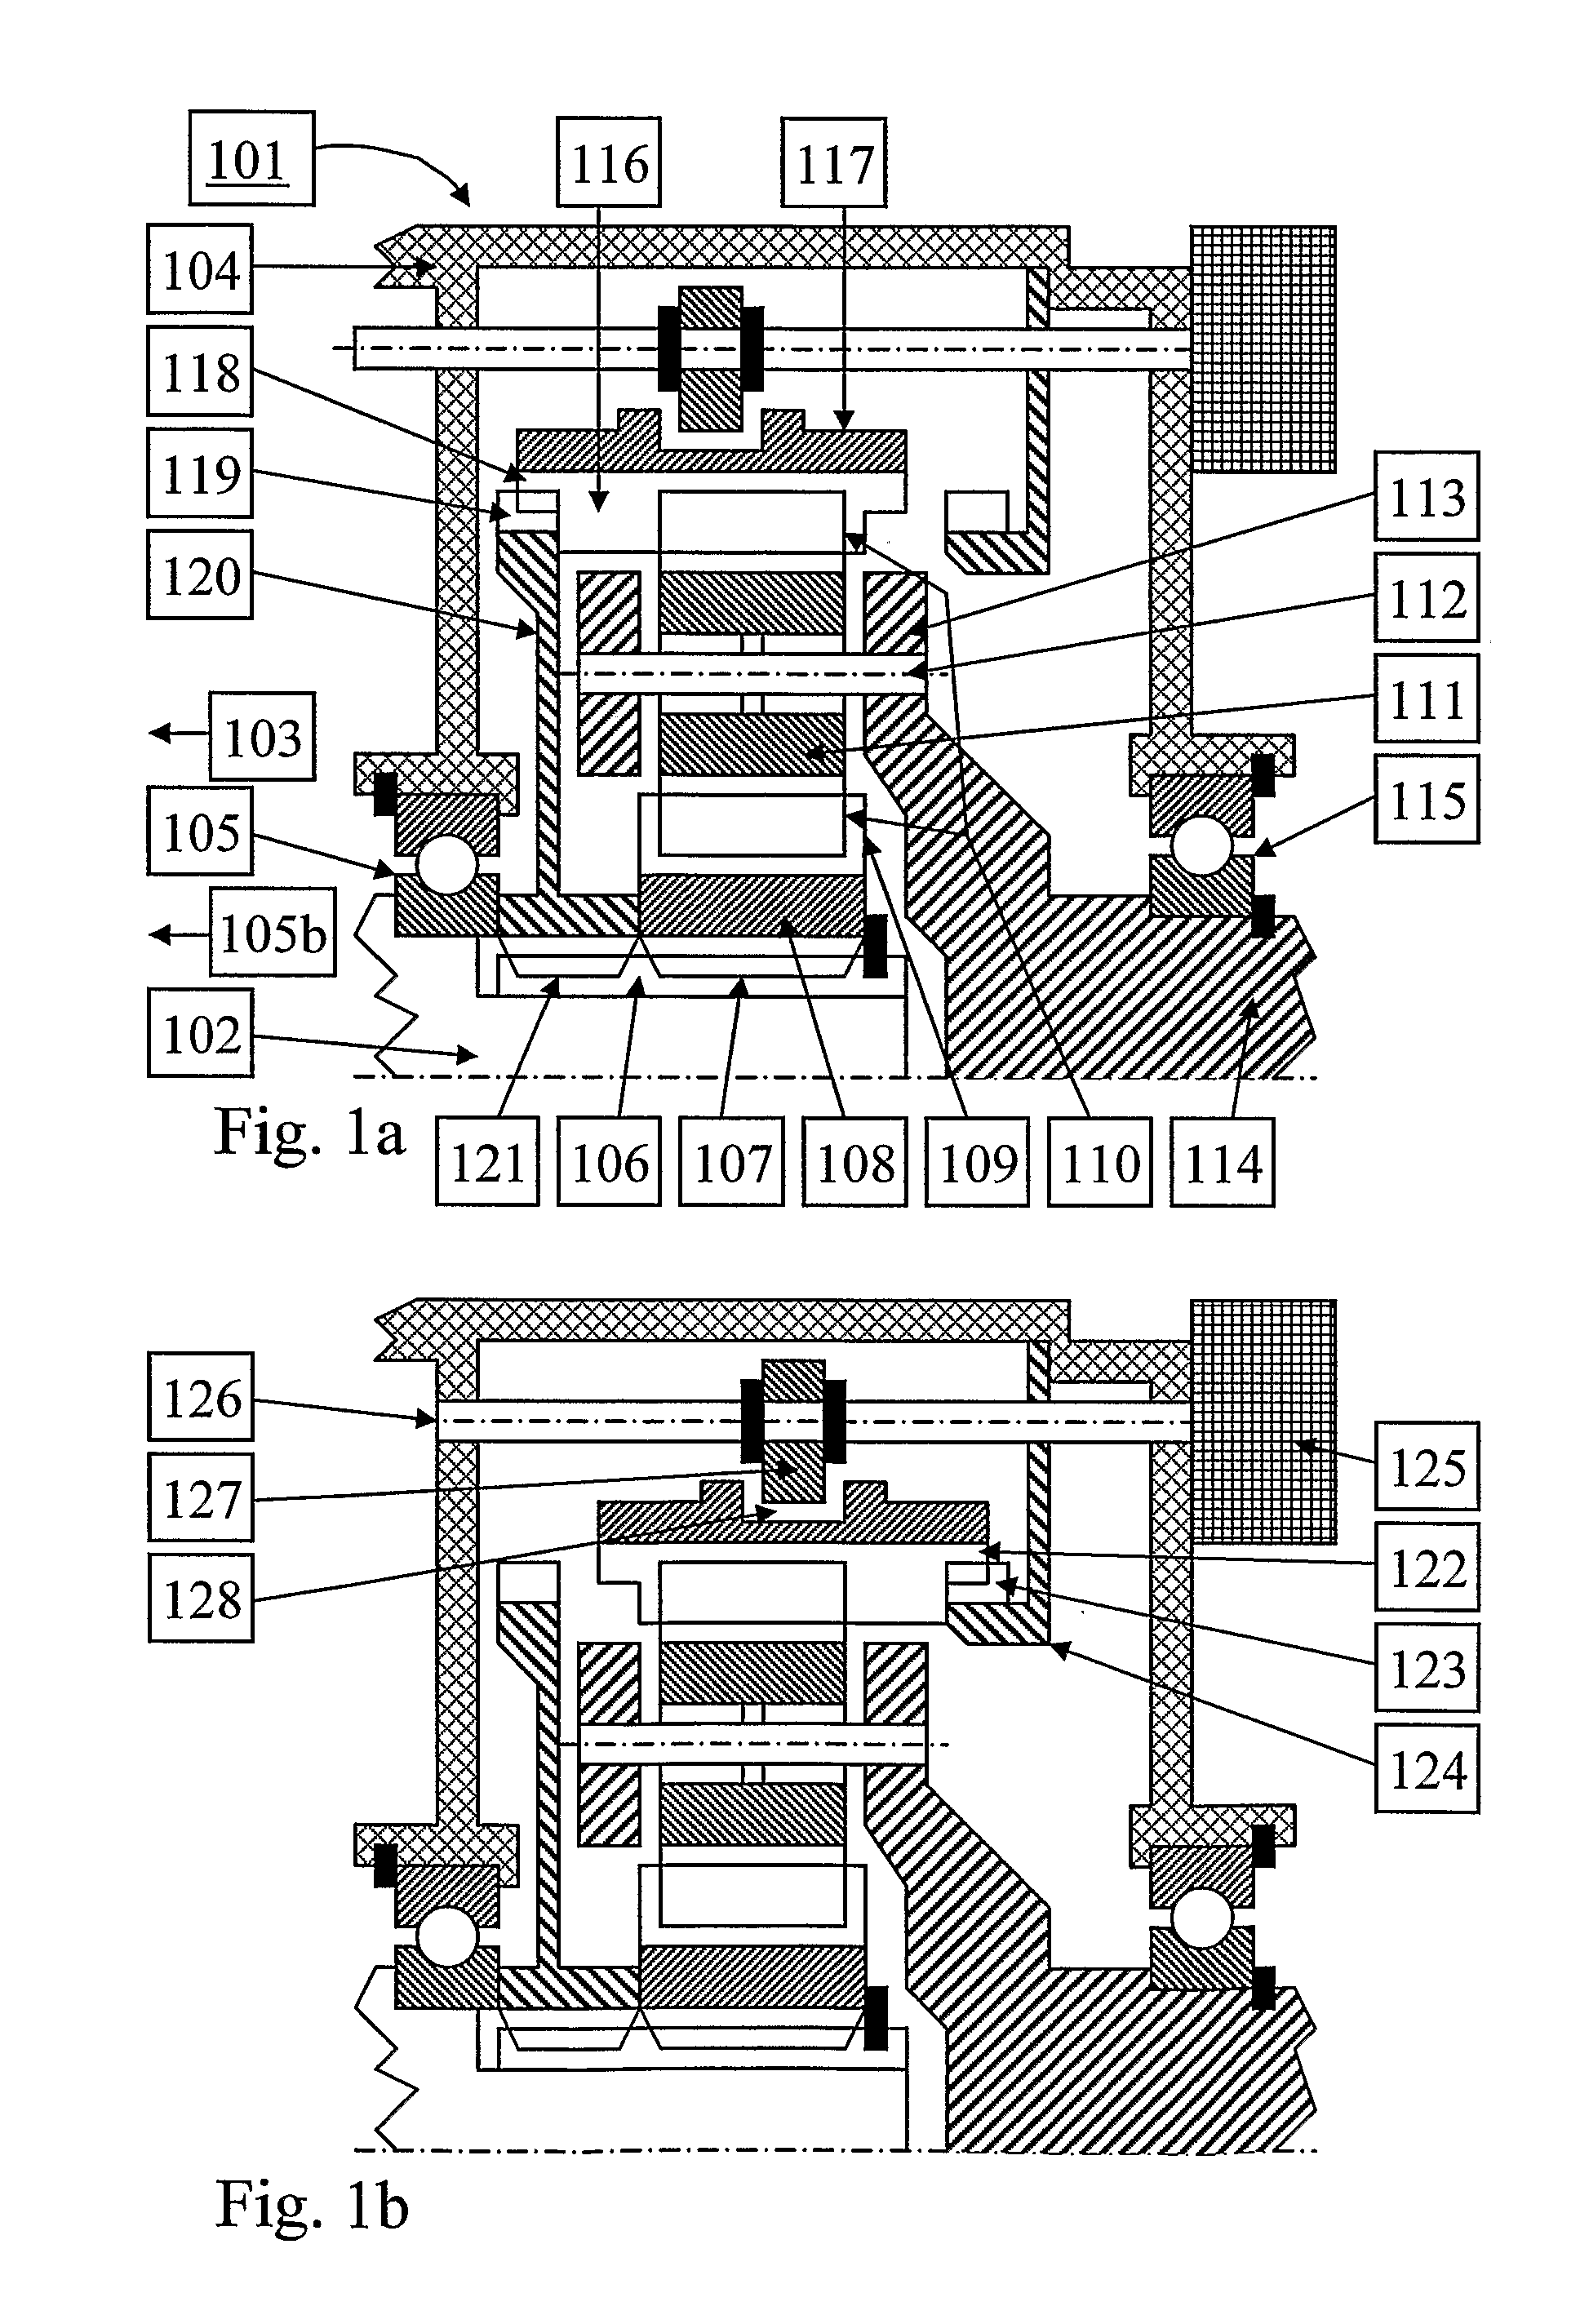 System for preventing gear hopout in a tooth clutch in a vehicle transmission